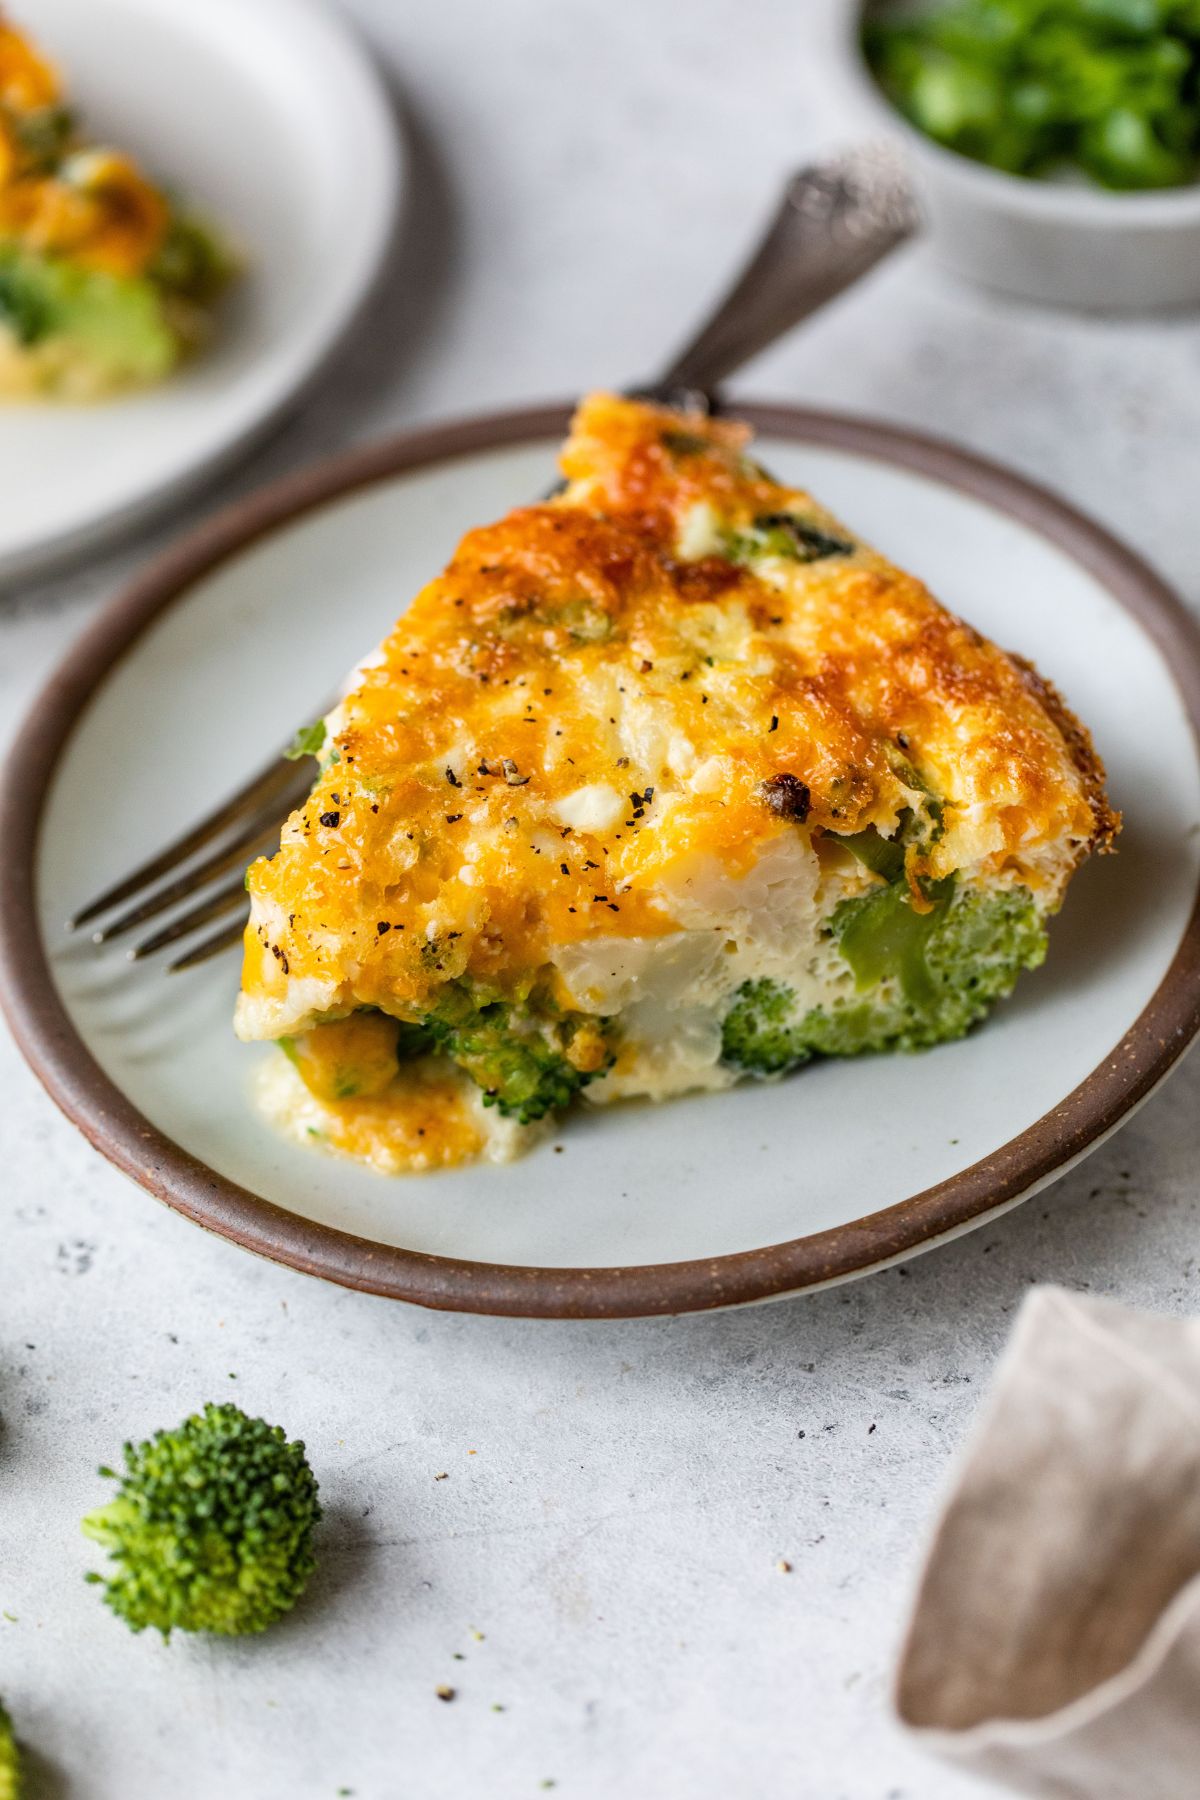 Serving of crustless quiche with broccoli on a plate.